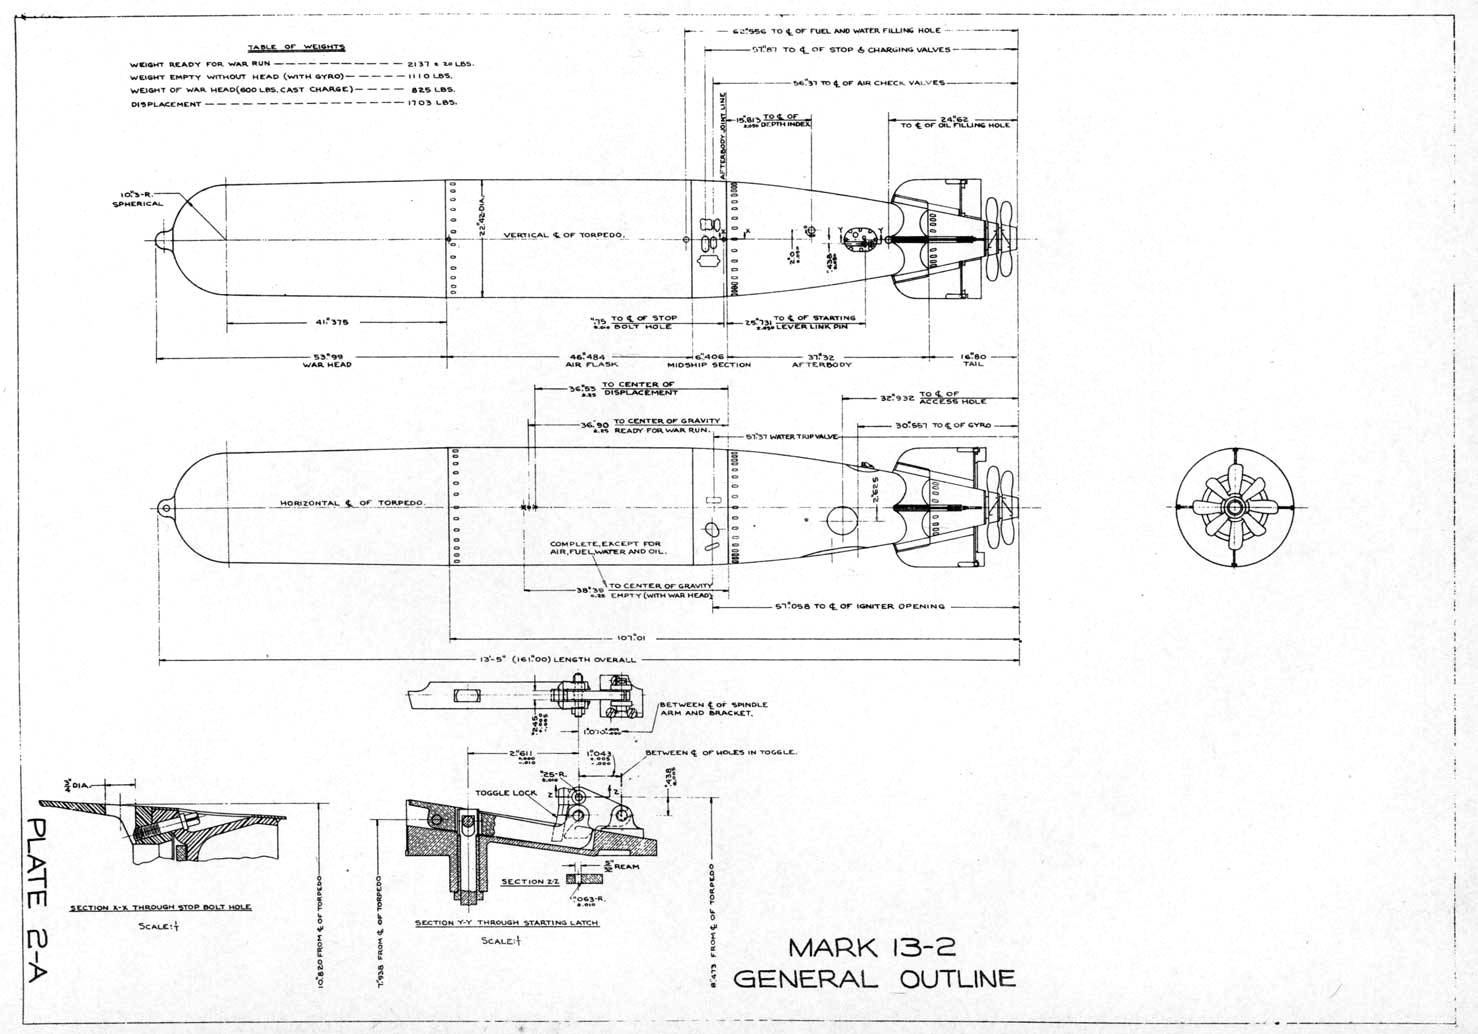 Line drawing of the Mark XIII aerial torpedo taken from the US Navy Bureau of Ordinance (BuOrd) Ordinance Pamphlet, Jul 1942. Photo 3 of 3.